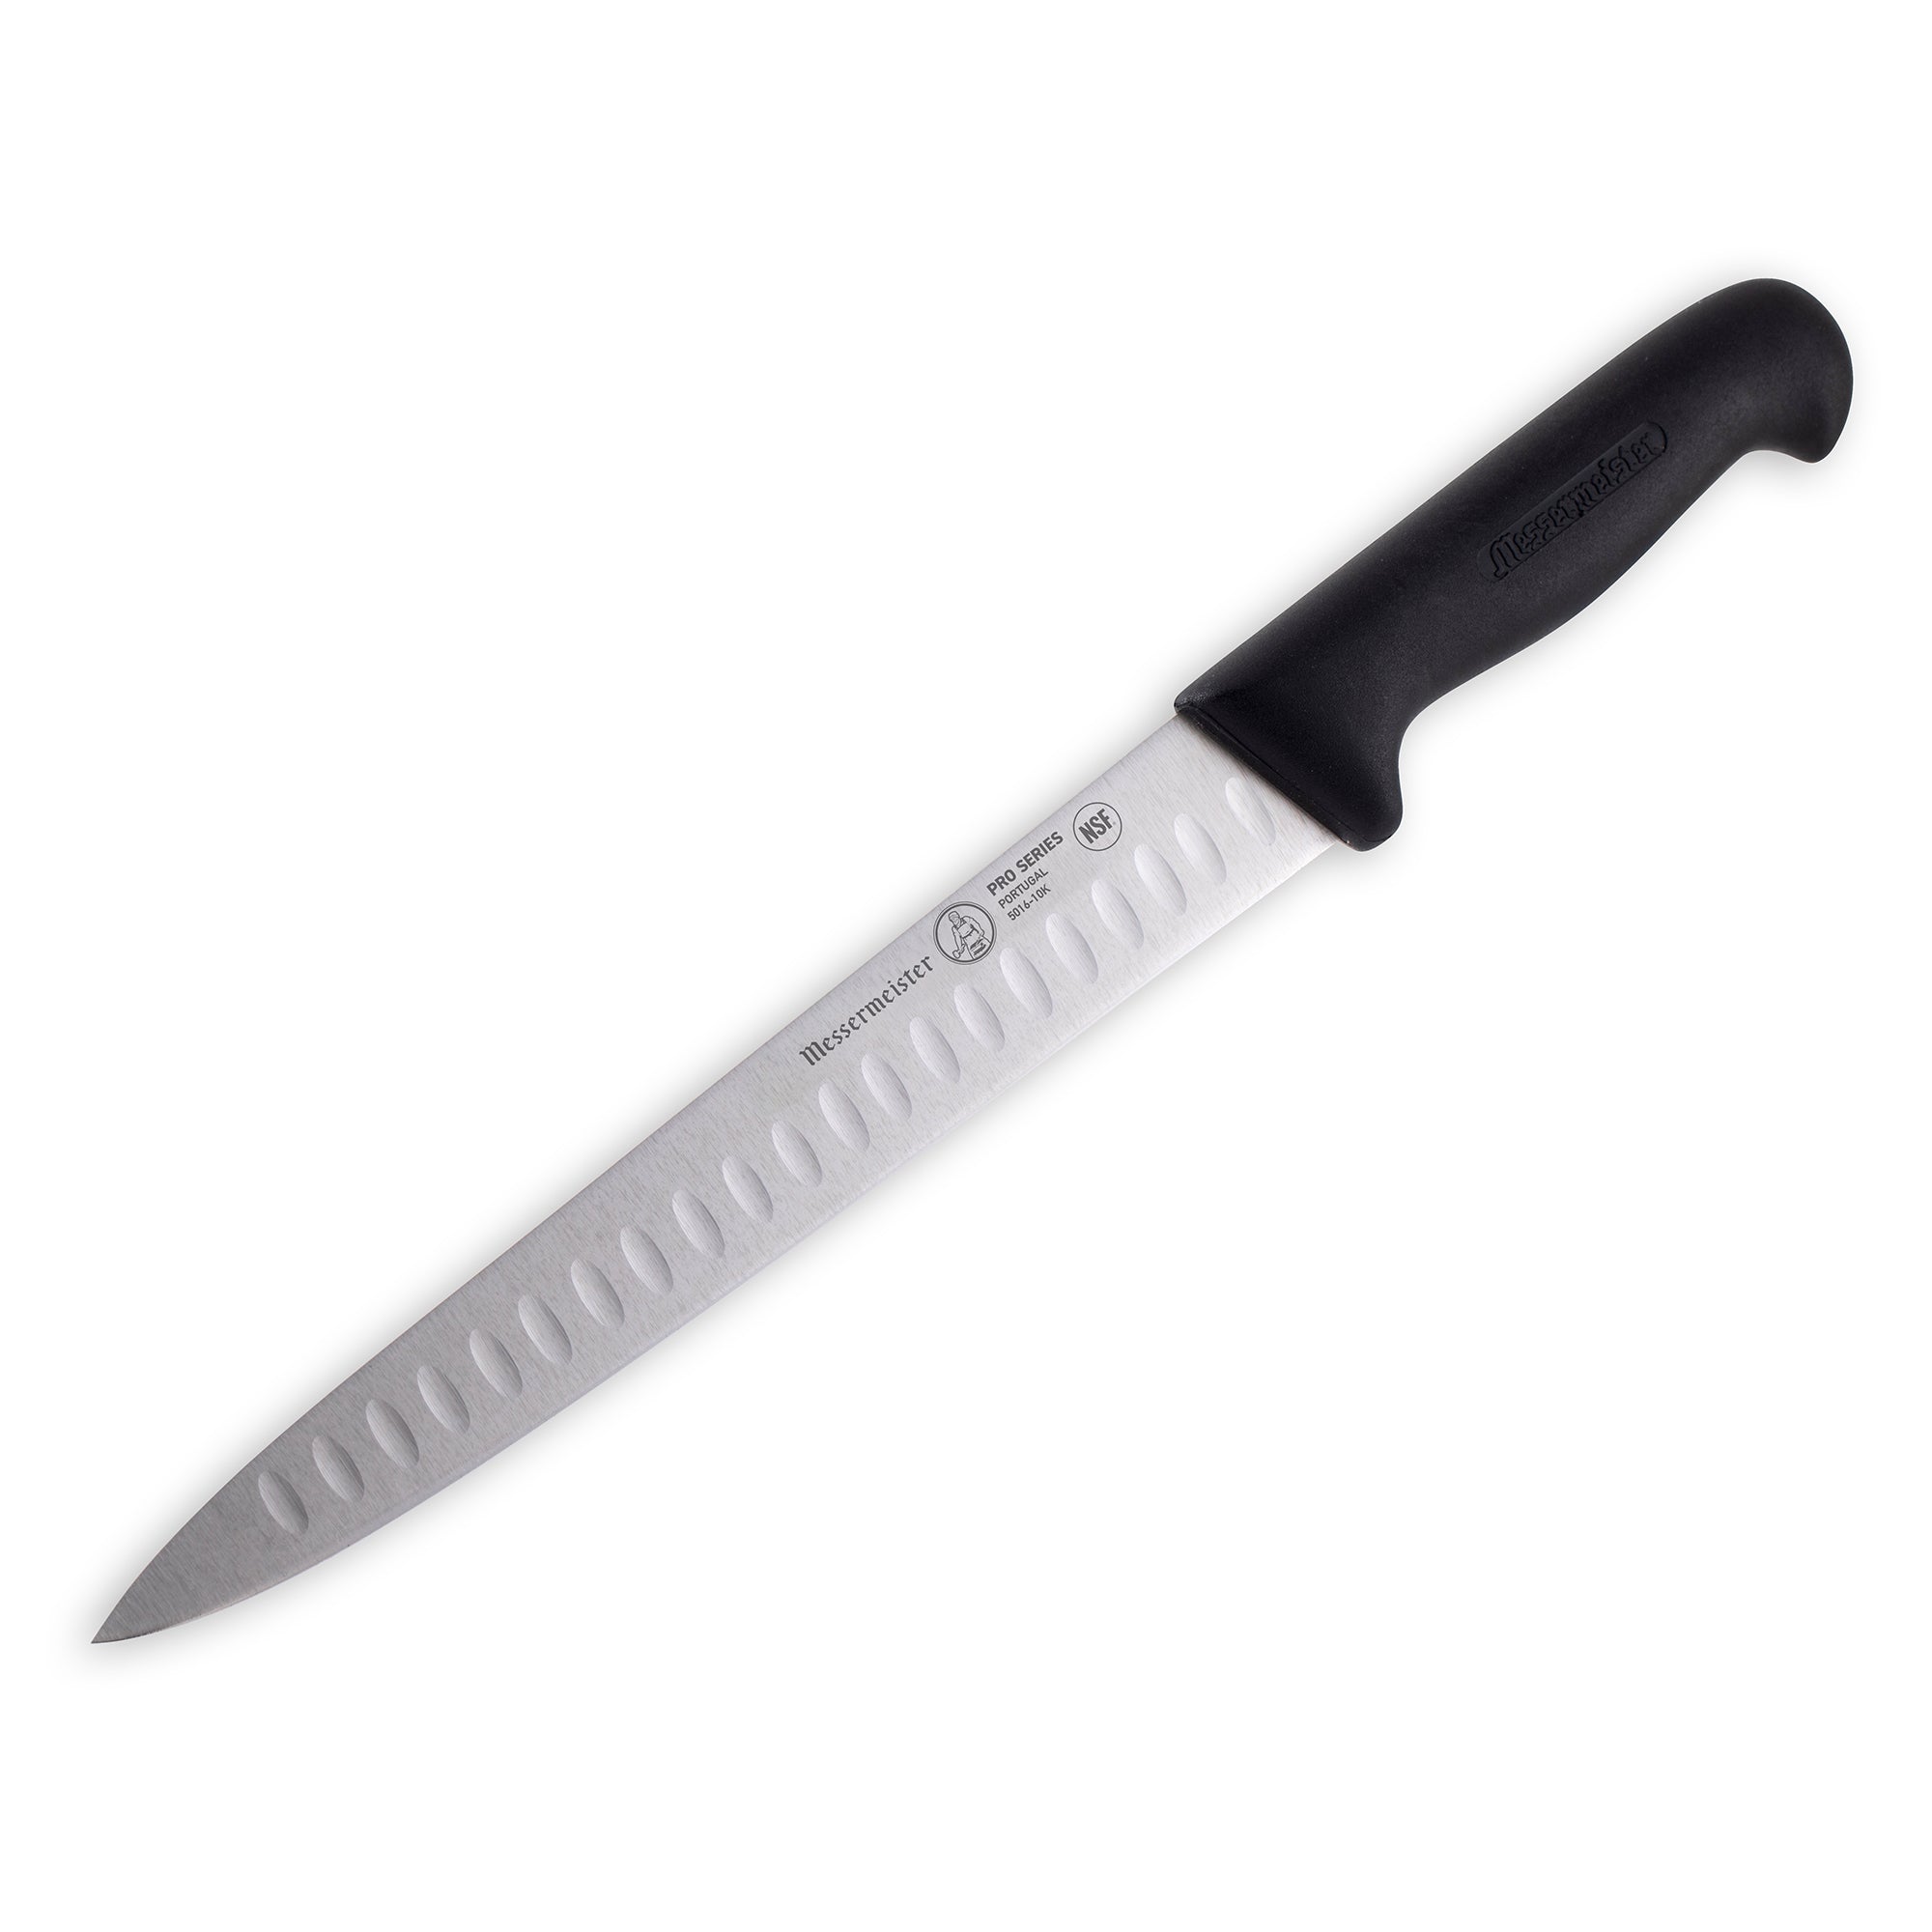 Pro Series Kullens Carving Knife - 10 Inch